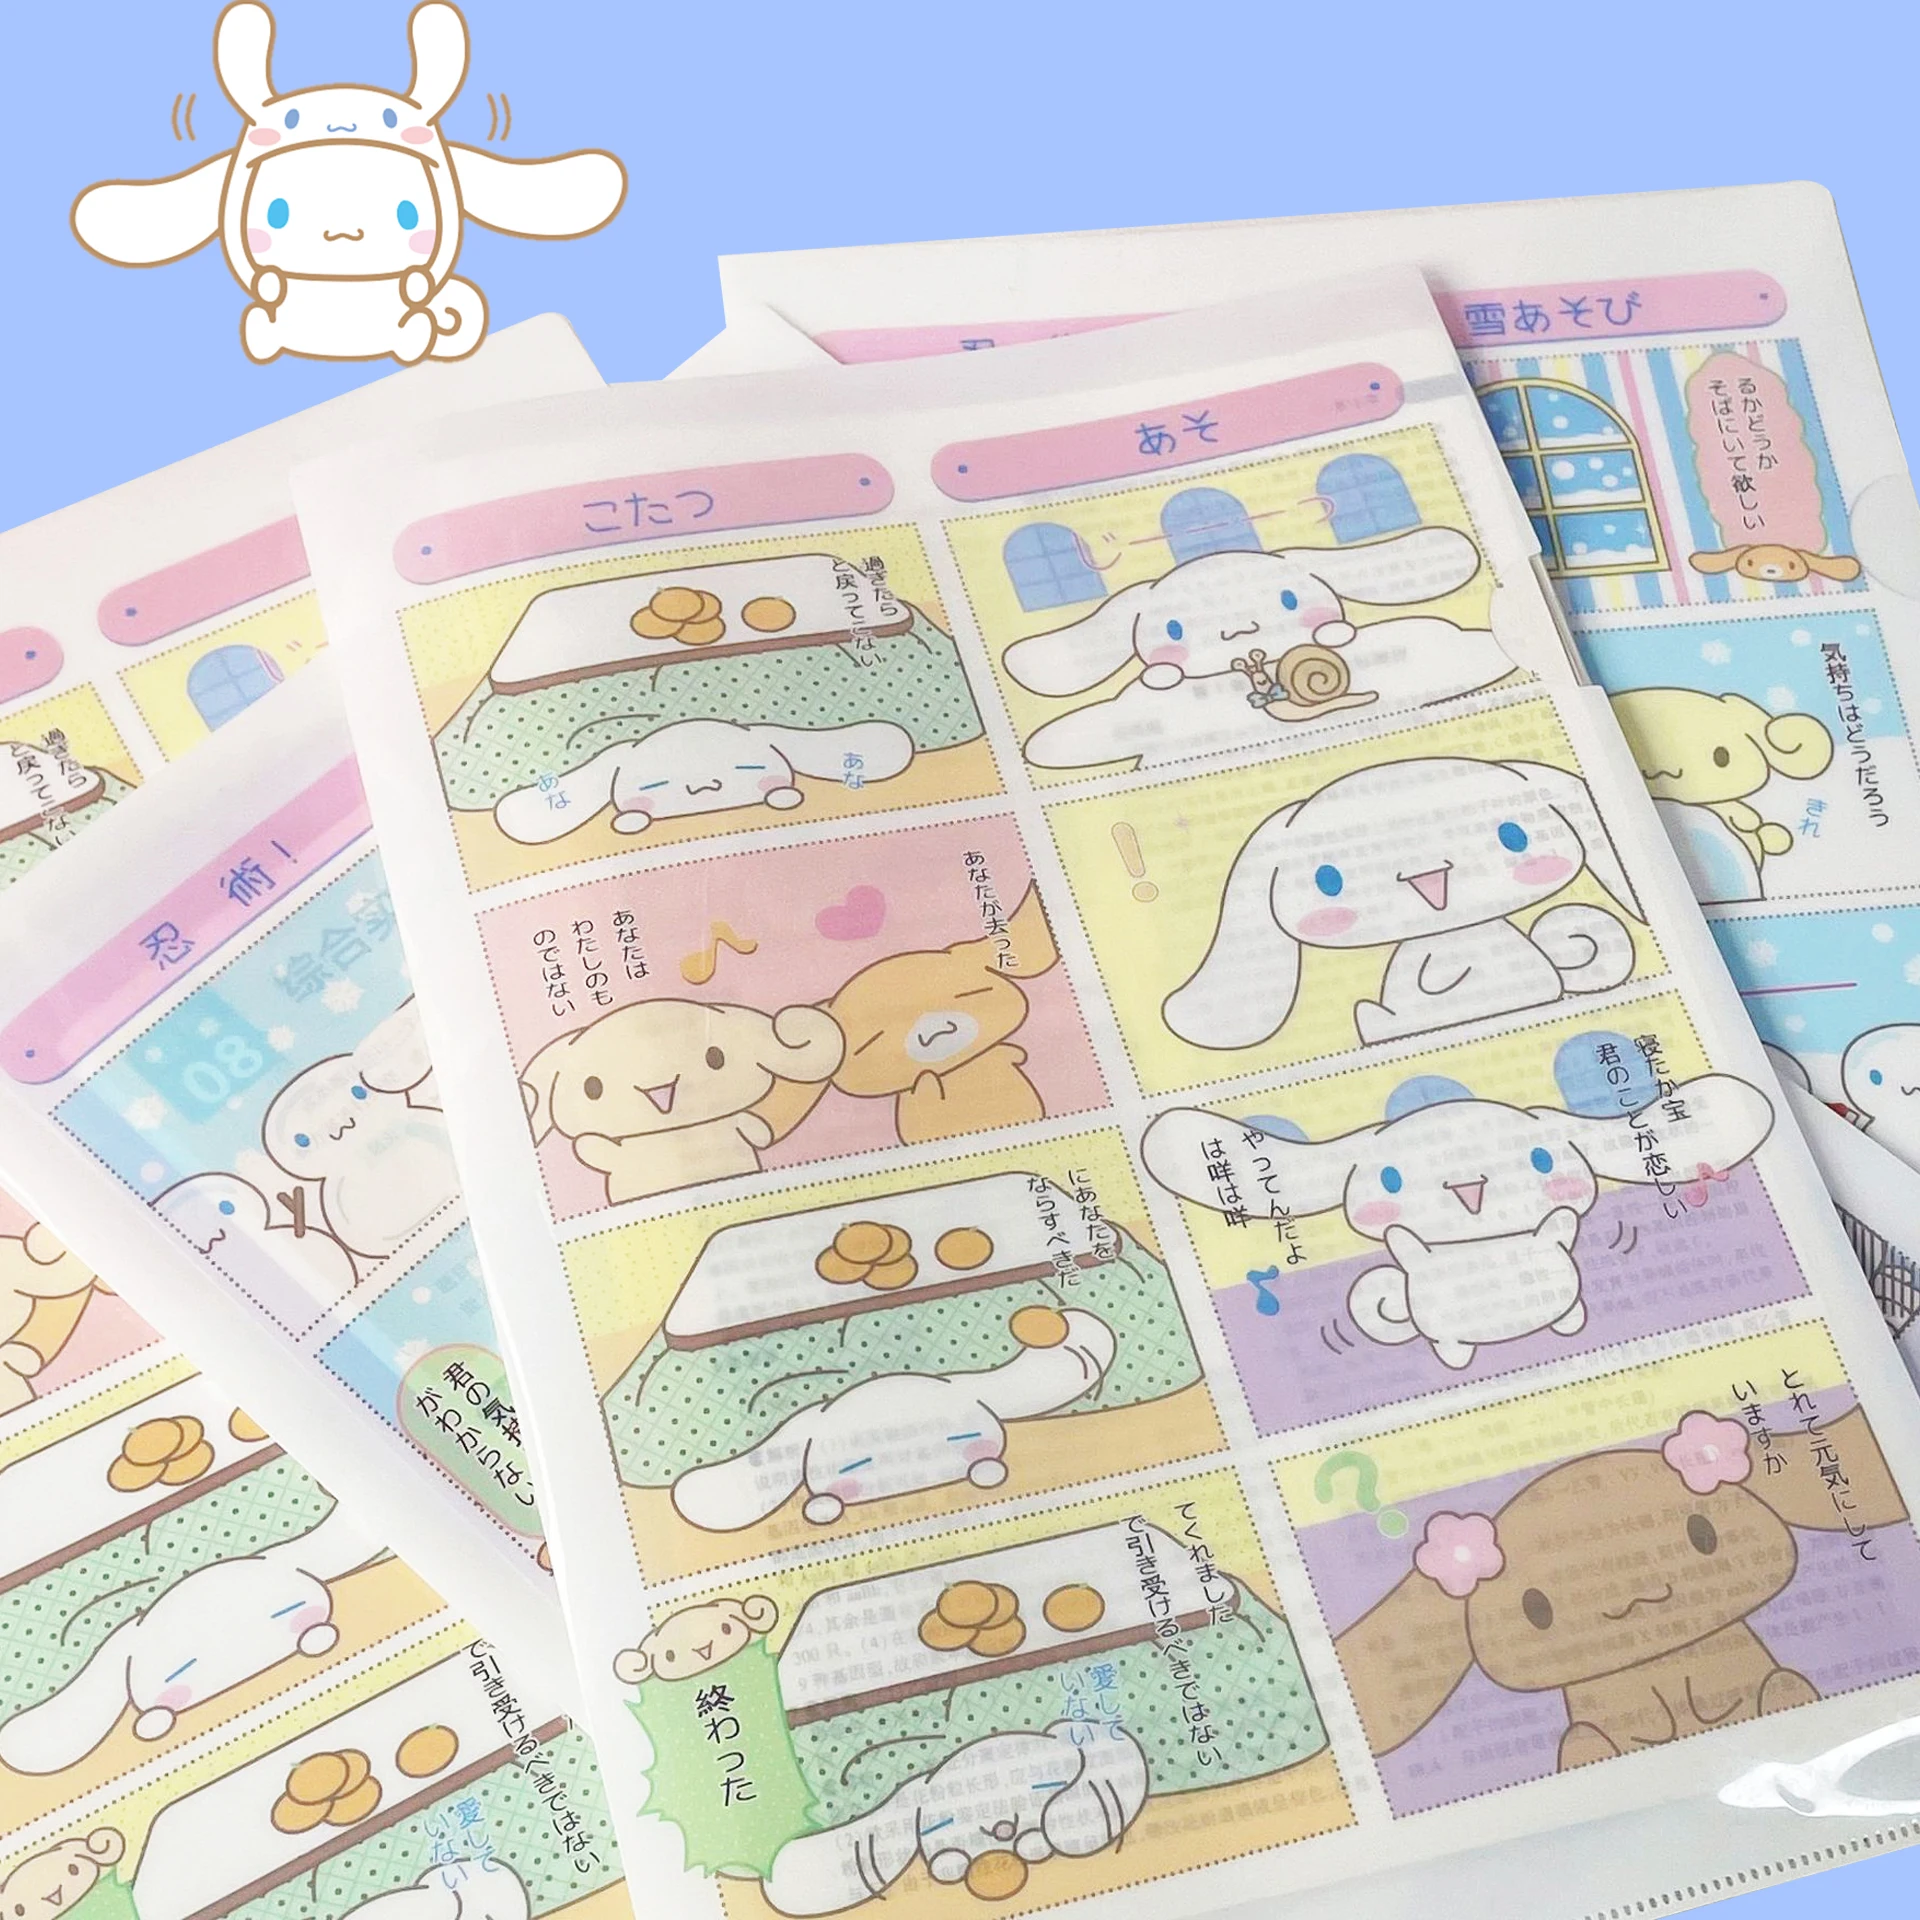 

Sanrioed A4 File Folder Kawaii Cinnamoroll Anime Cute Test Papers Storage Students Stationery Office Lovely Girls Kids Gifts